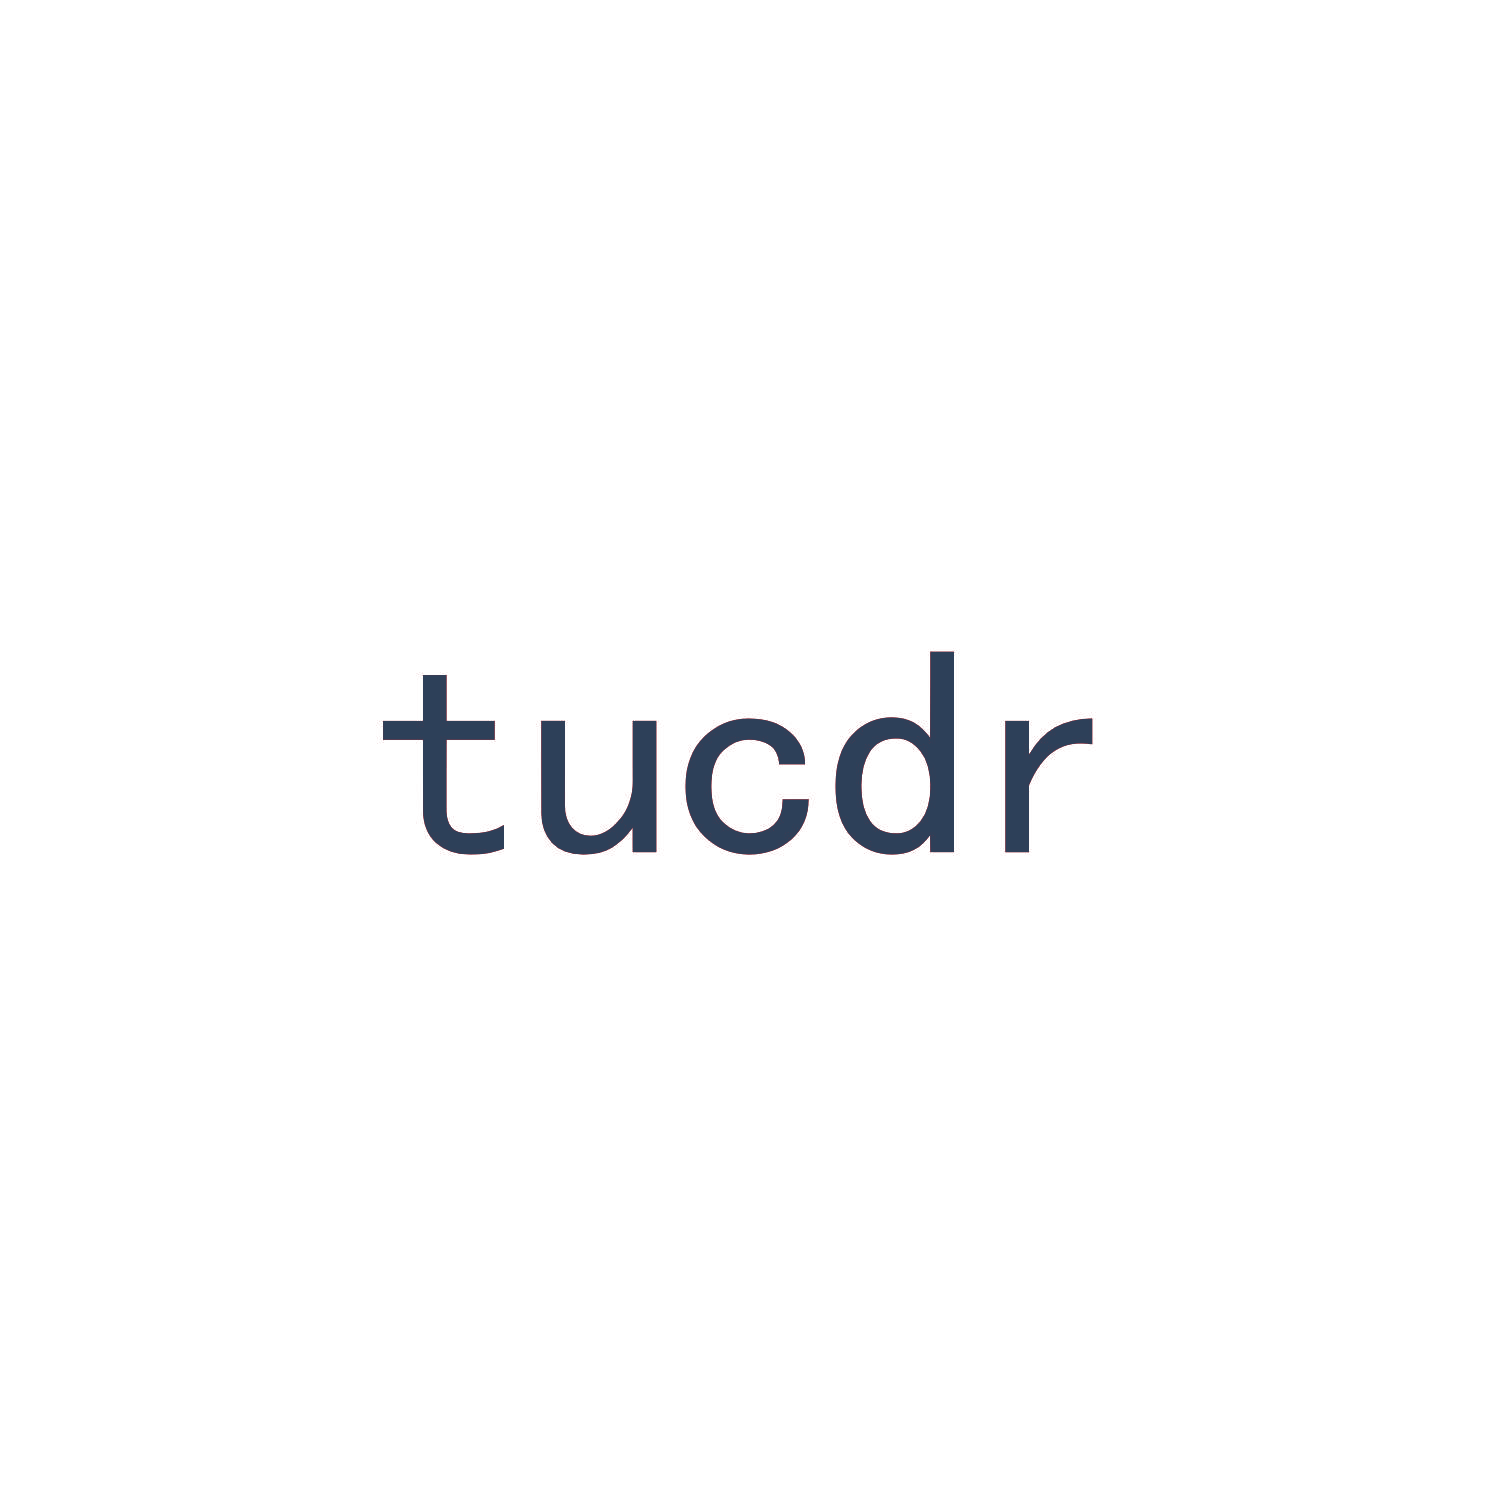 TUCDR